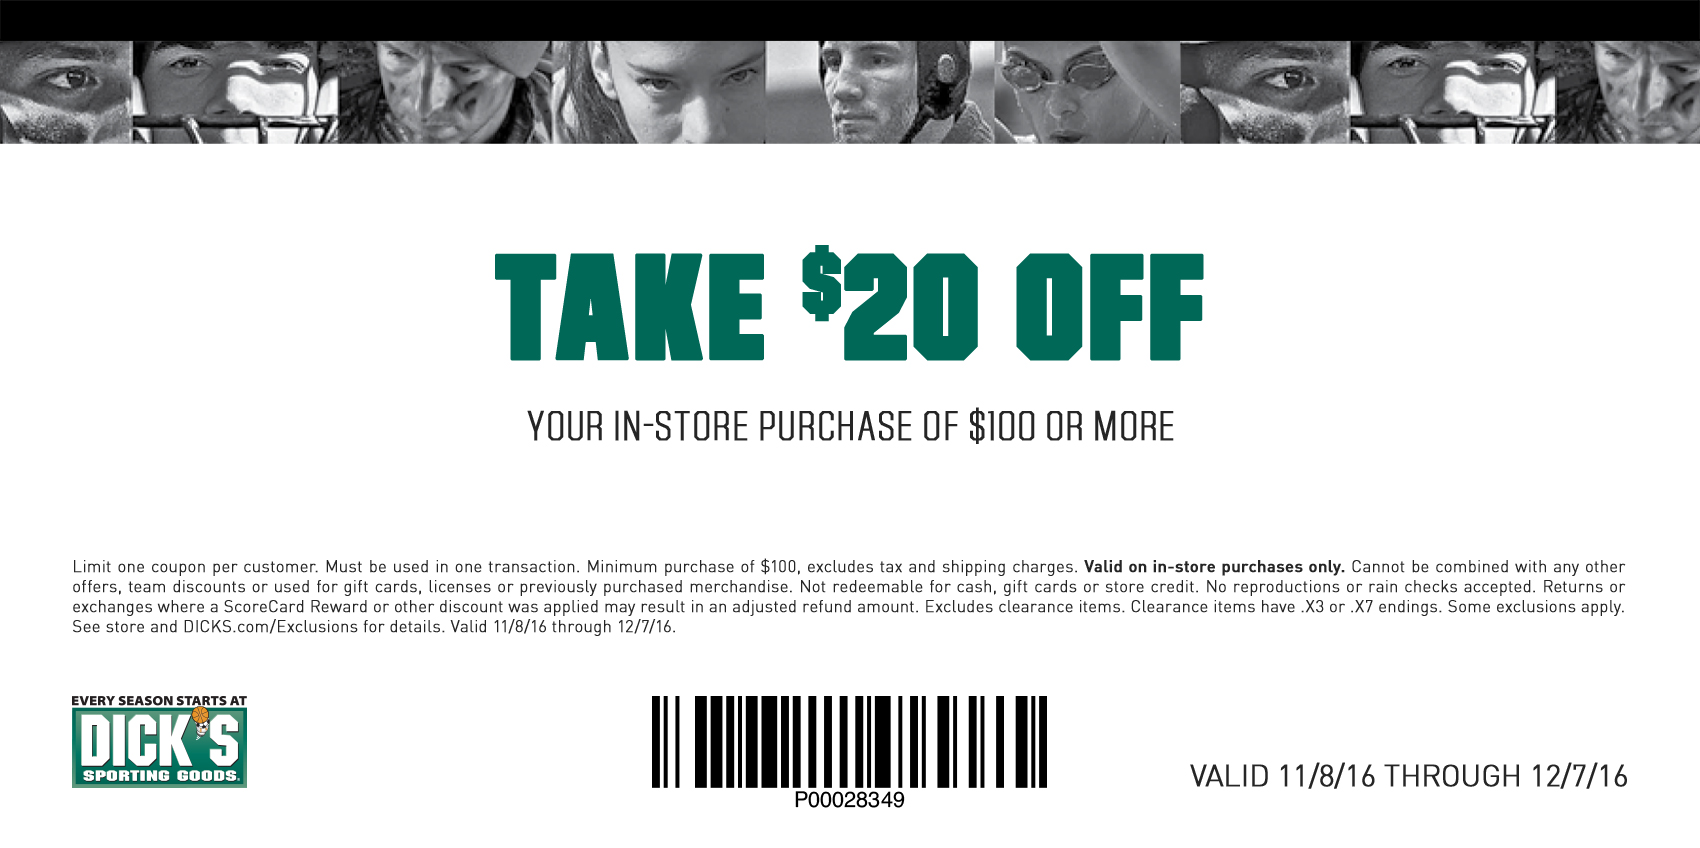 Limit one coupon per customer. Must be used in one transaction. Minimum purchase of $100, excludes tax and shipping charges. Valid on in-store purchases only. Cannot be combined with any other offers, team discounts or used for gift cards, licenses or previously purchased merchandise. Not redeemable for cash, gift cards or store credit. No reproductions or rain checks accepted. Returns or exchanges where a ScoreCard Reward or other discount was applied may result in an adjusted refund amount. Excludes clearance items. Clearance items have .X3 or .X7 endings. Some exclusions apply.  See store and DICKS.com/Exclusions for details. Valid 11/8/16 through 12/7/16.